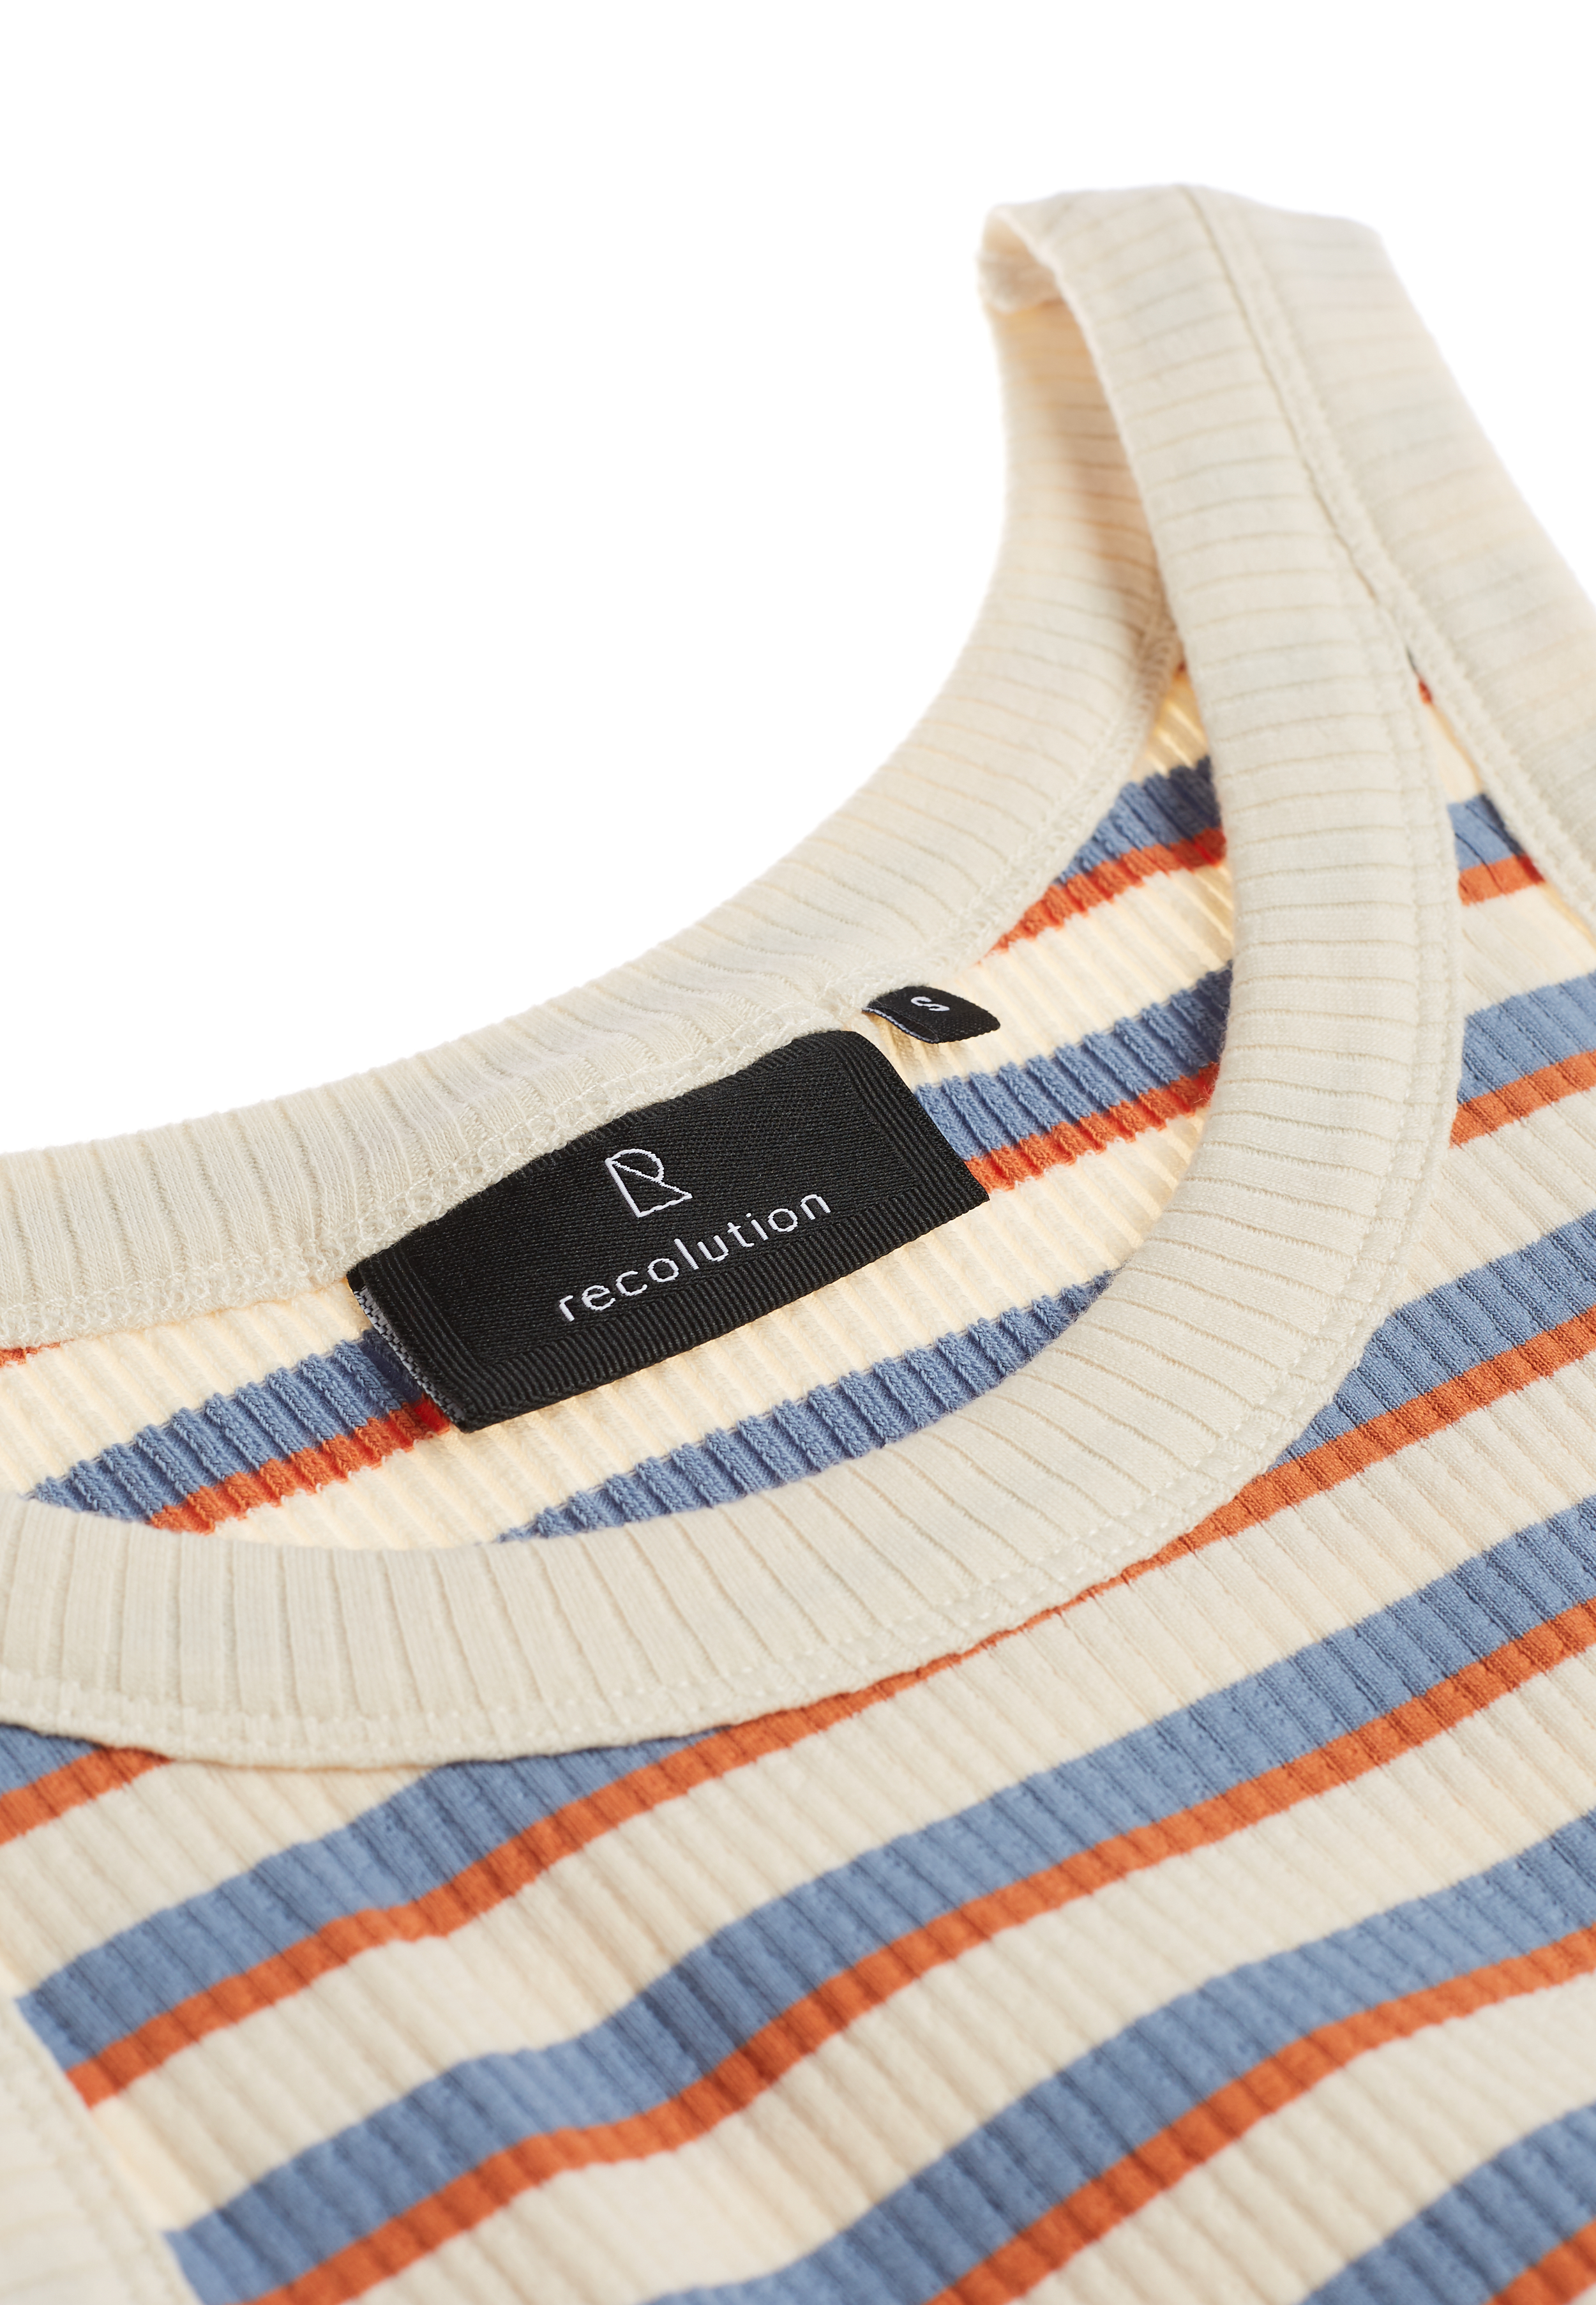 Top ANISE STRIPES summer sand